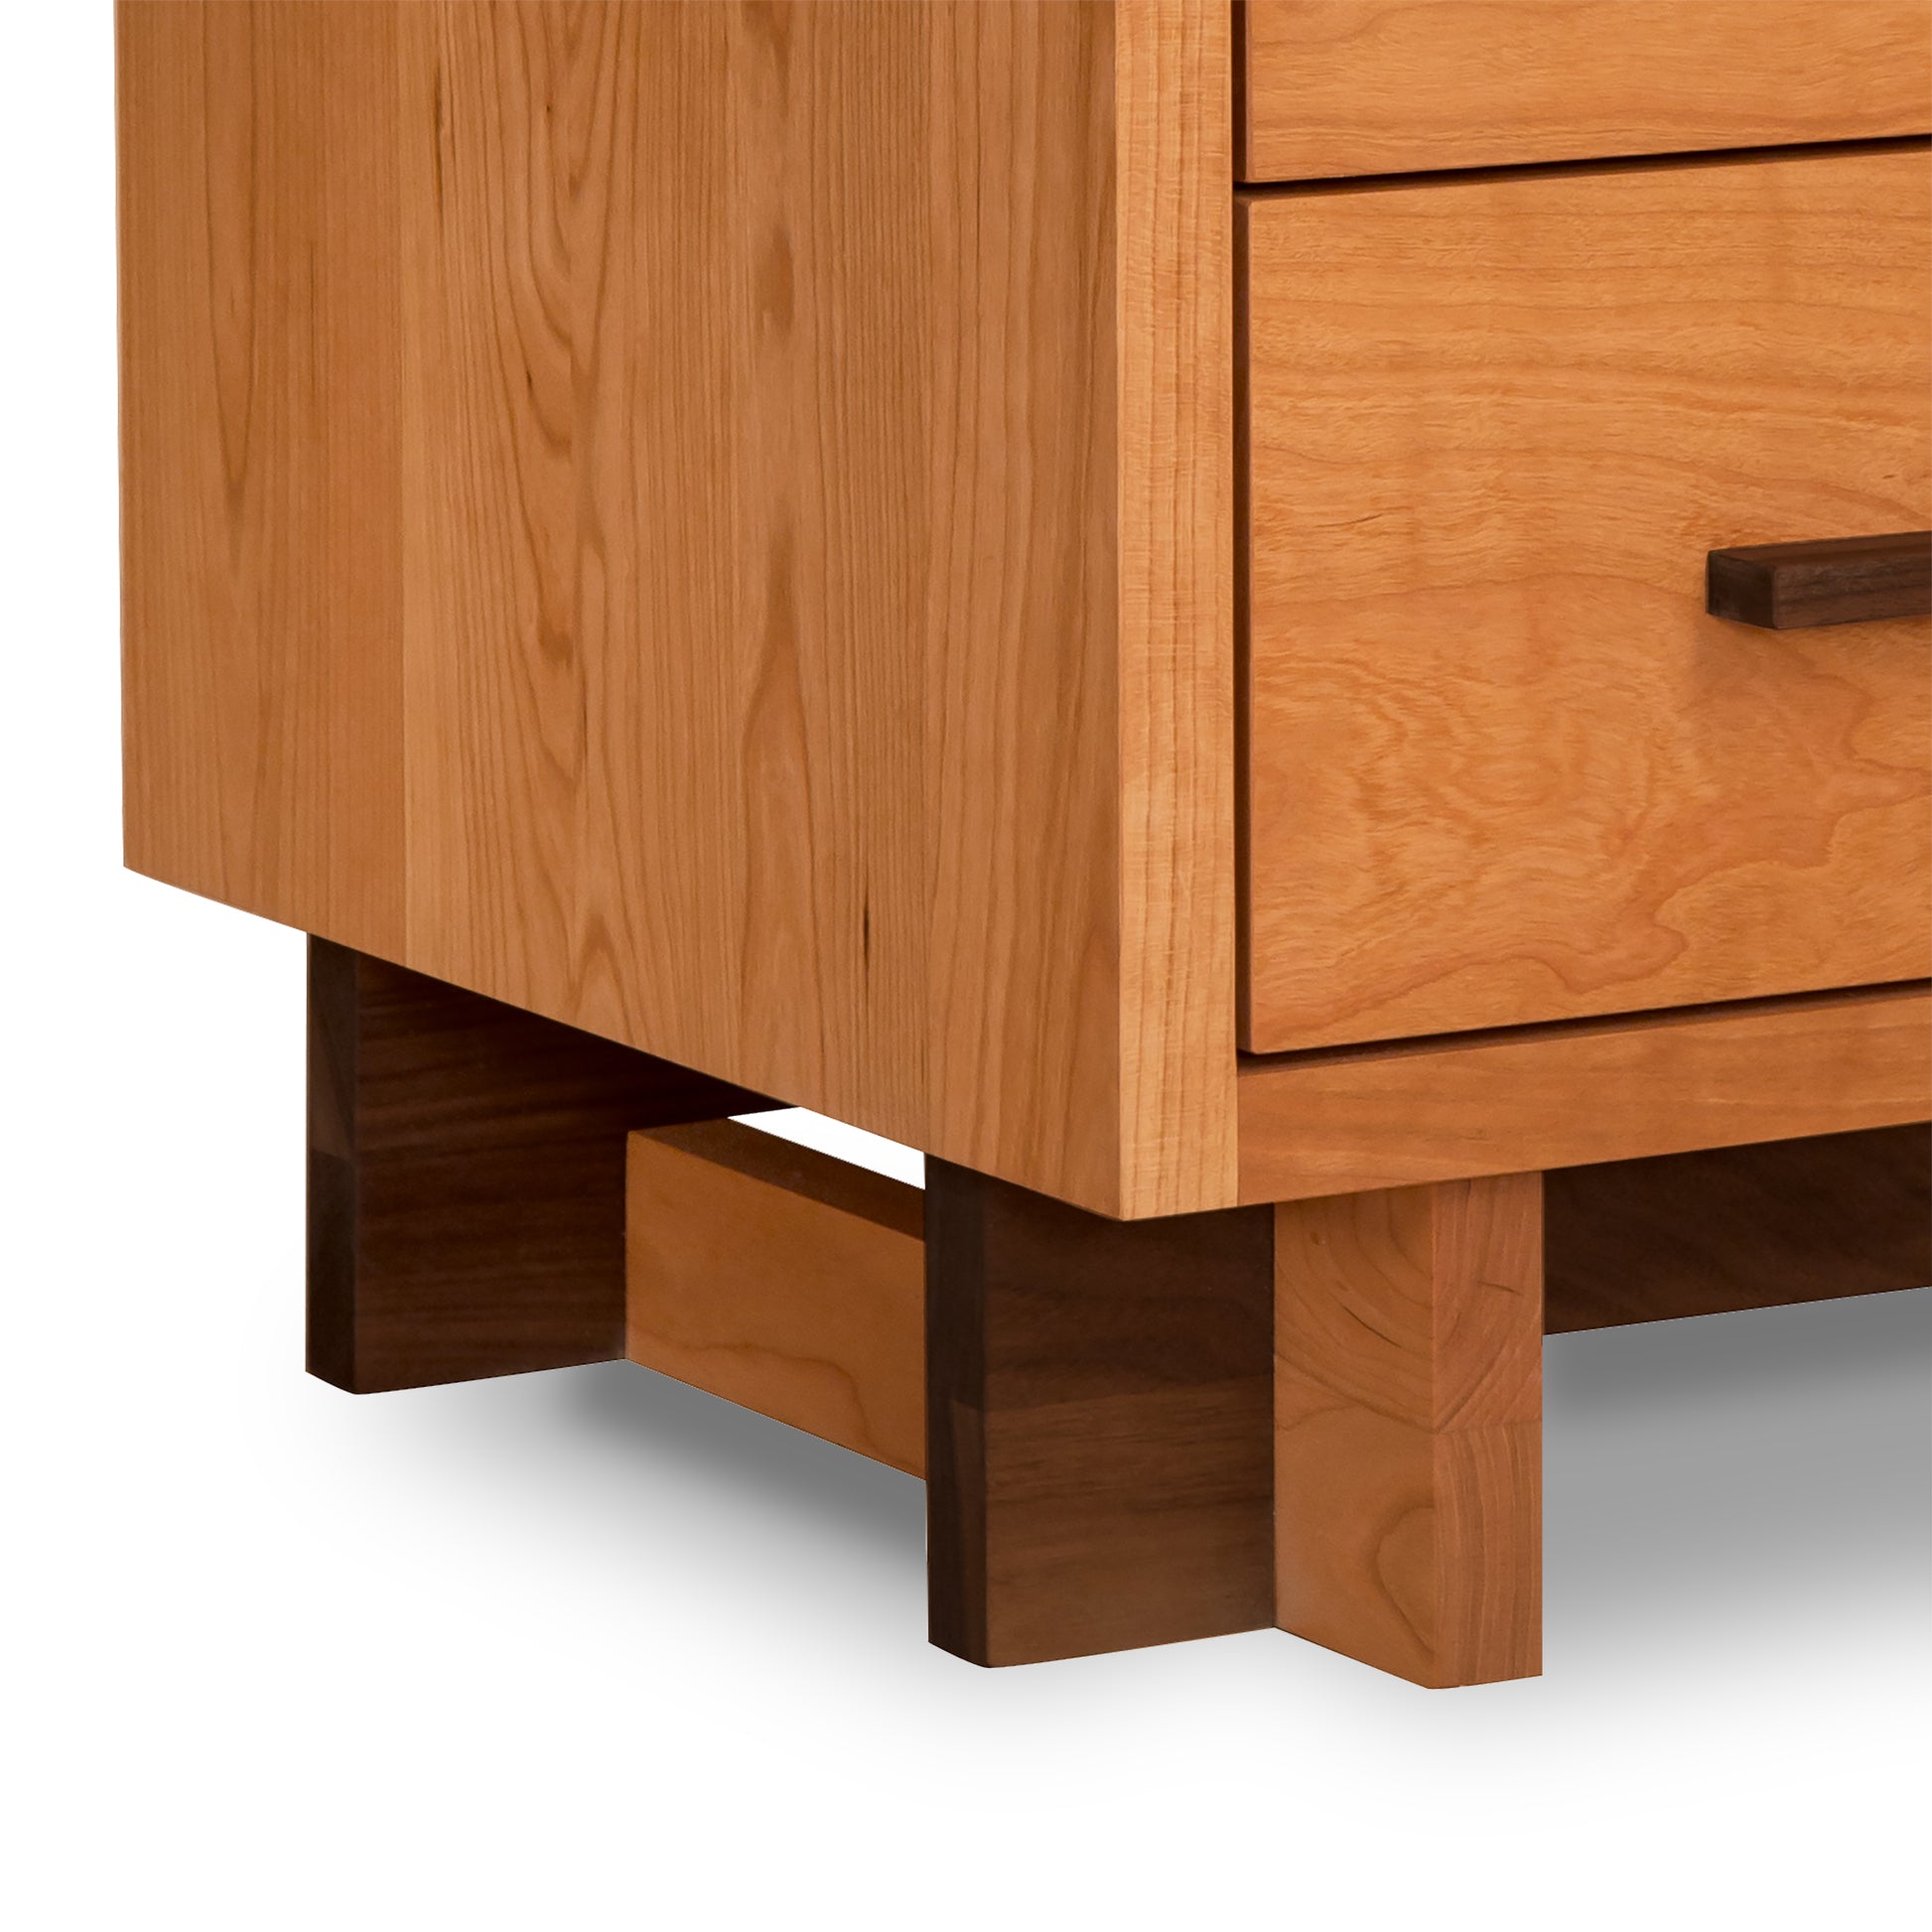 A Vermont Furniture Designs Modern American 3-Drawer Nightstand, perfect for a luxury bedroom.